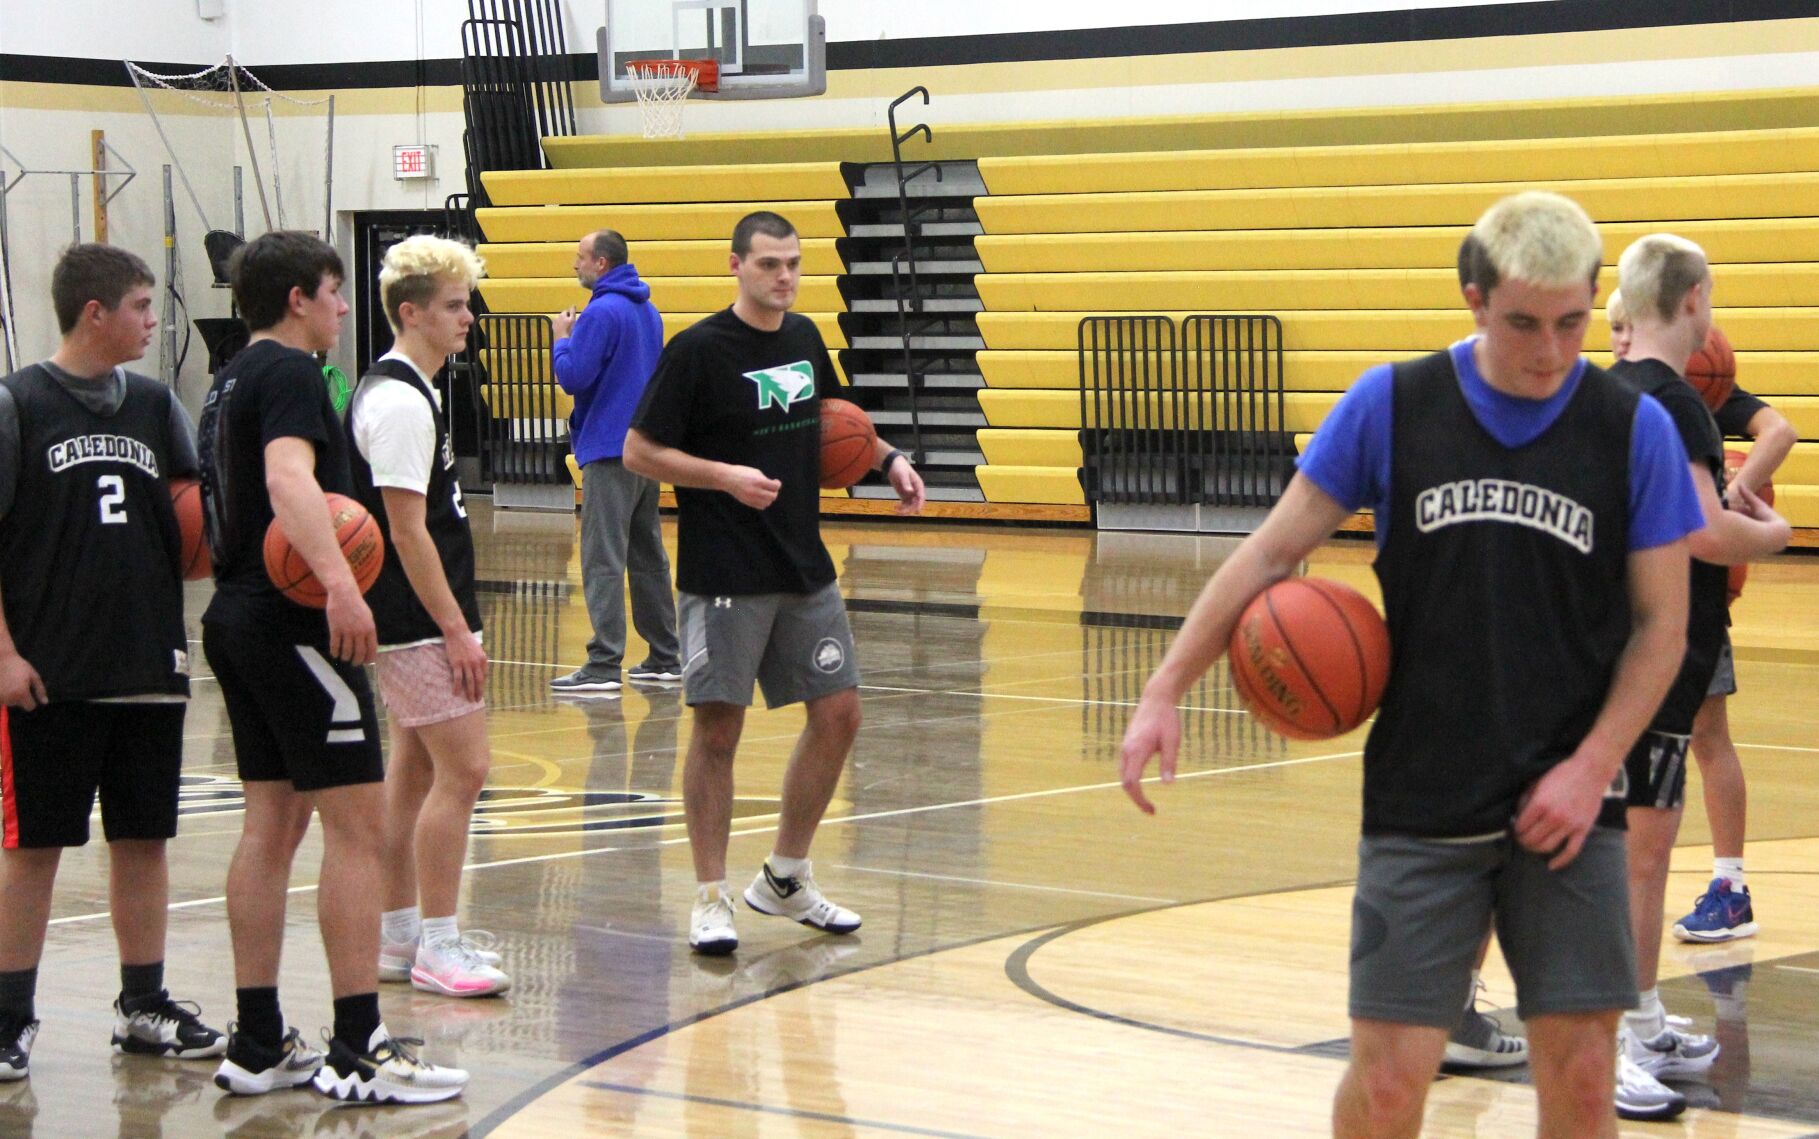 Owen King: Returning to Caledonia with a Passion for Coaching and Community Involvement